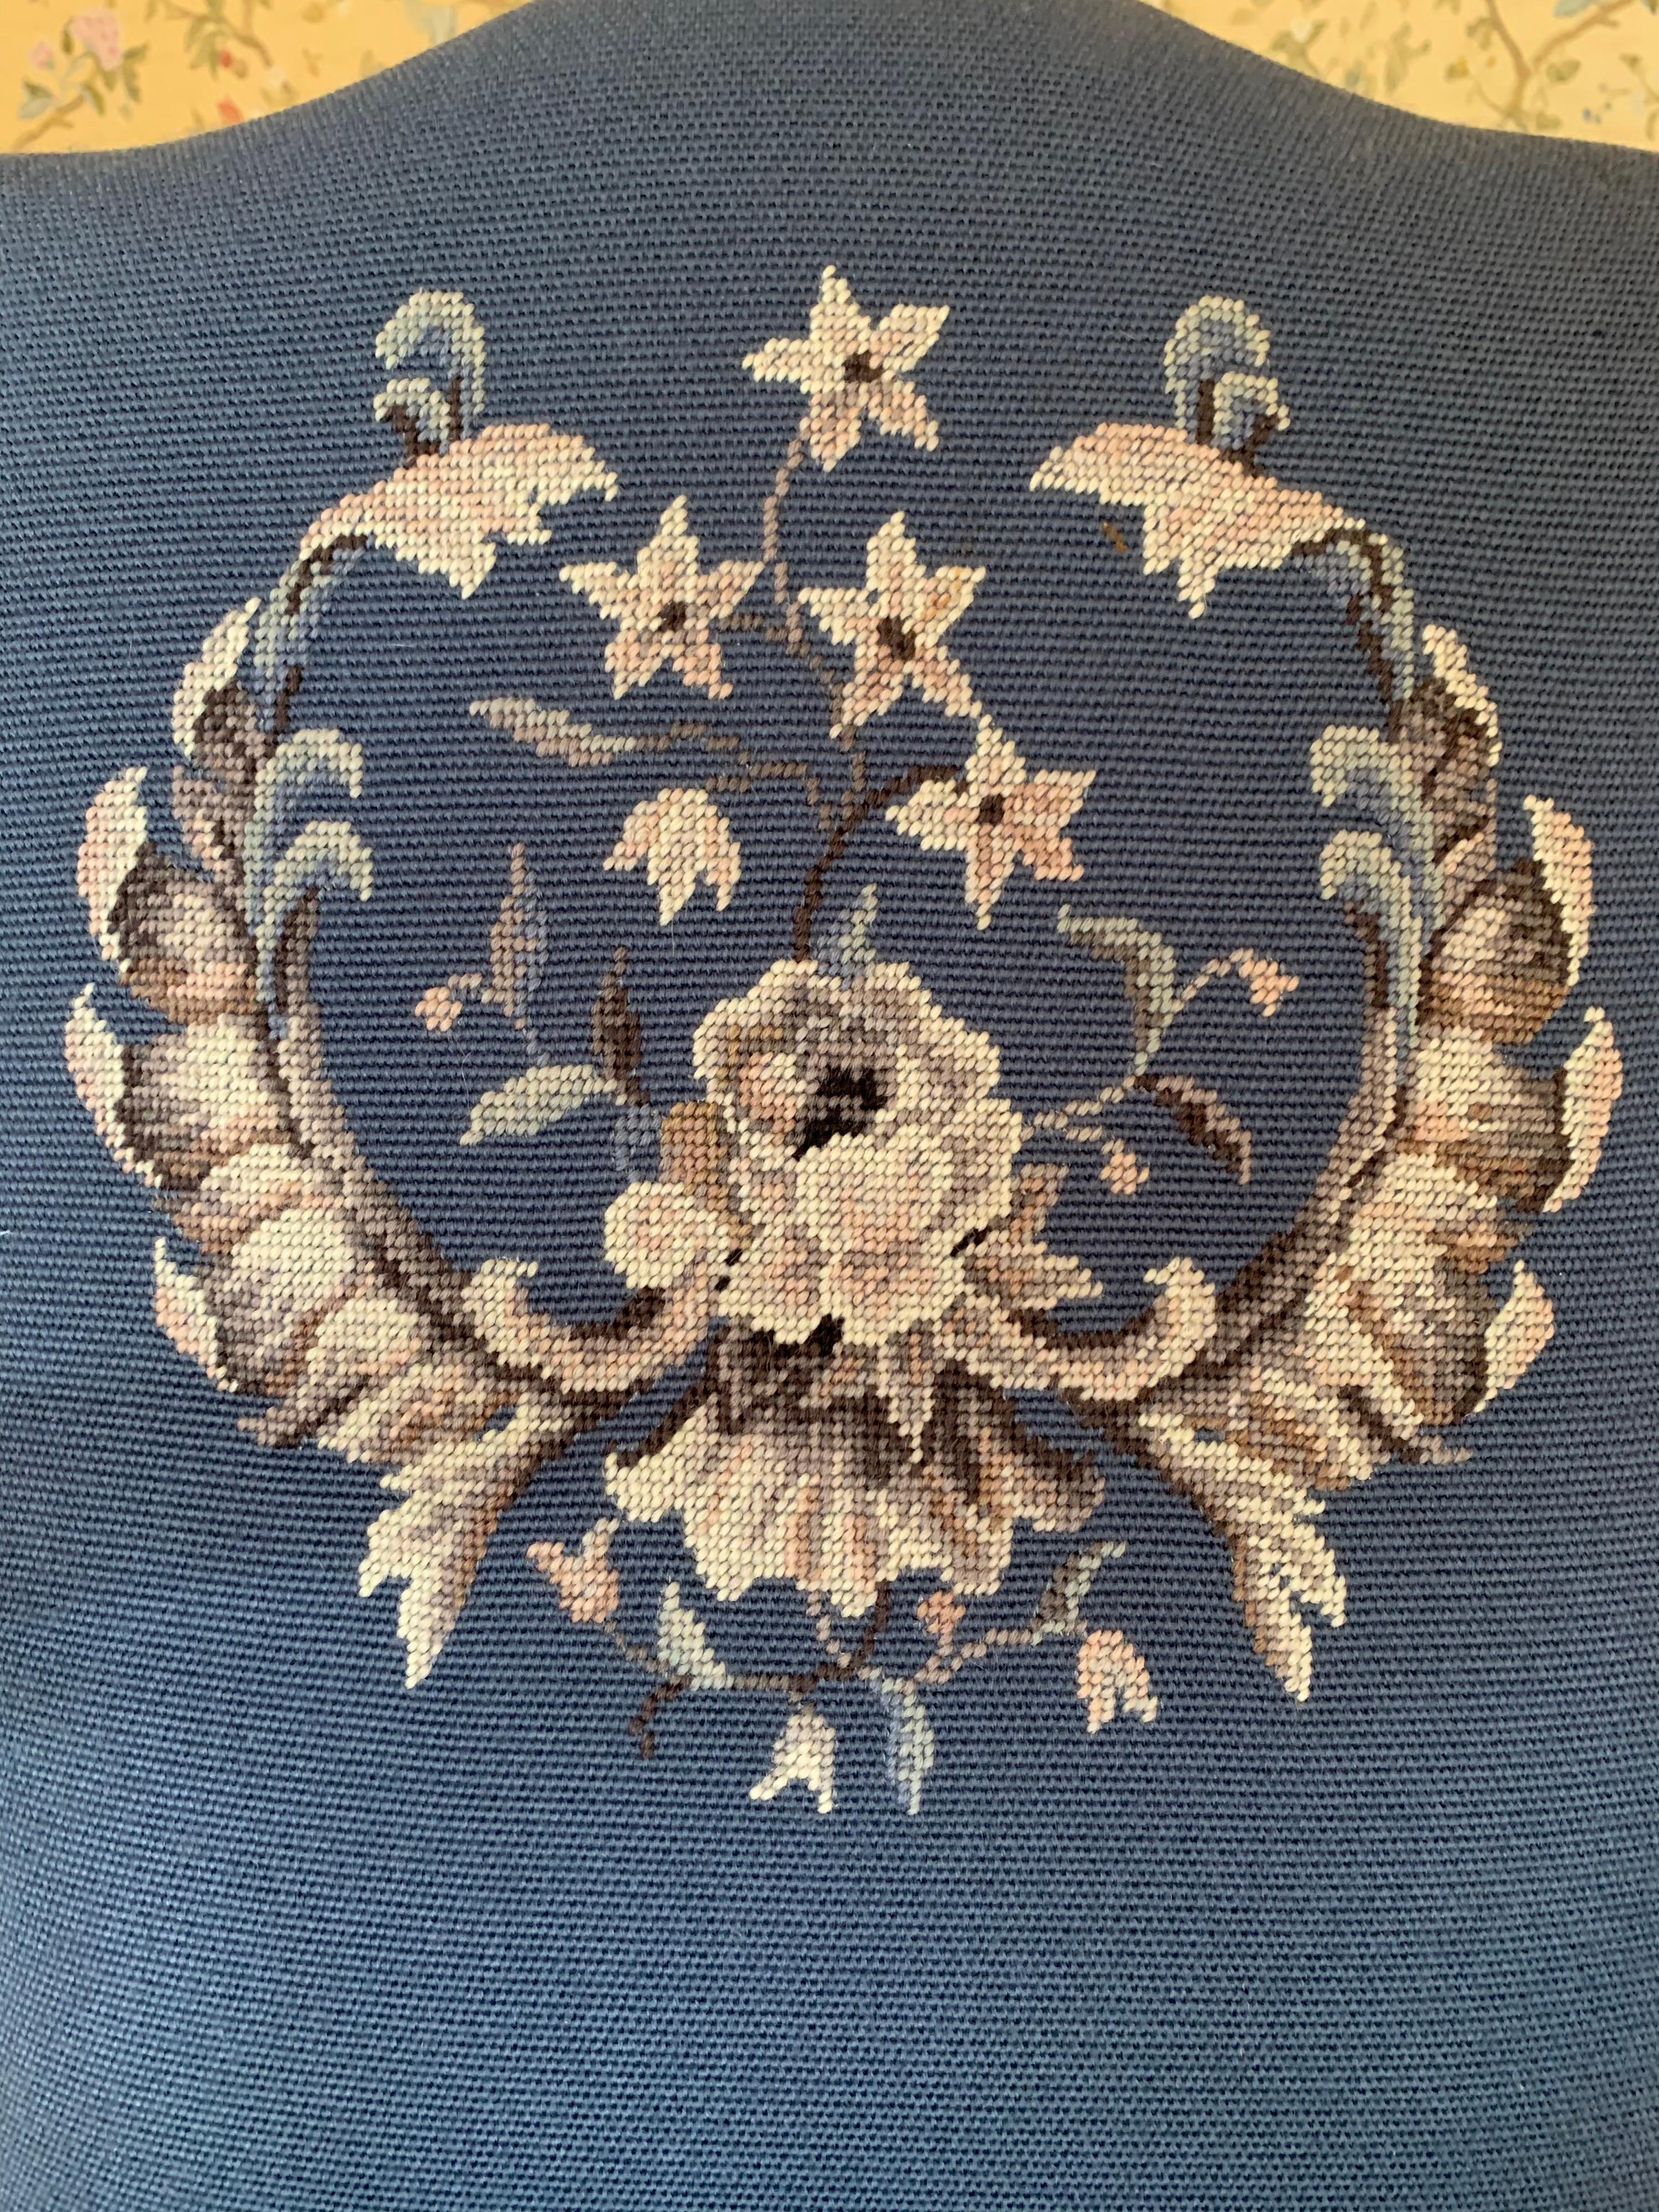 A magnificent set of four embroidered needlepoint dining chairs that have a very regal emblem at backrest. The emblem makes one think these chair belong in the White House yet they come from a grand home in Connecticut. One arm has a crack that has